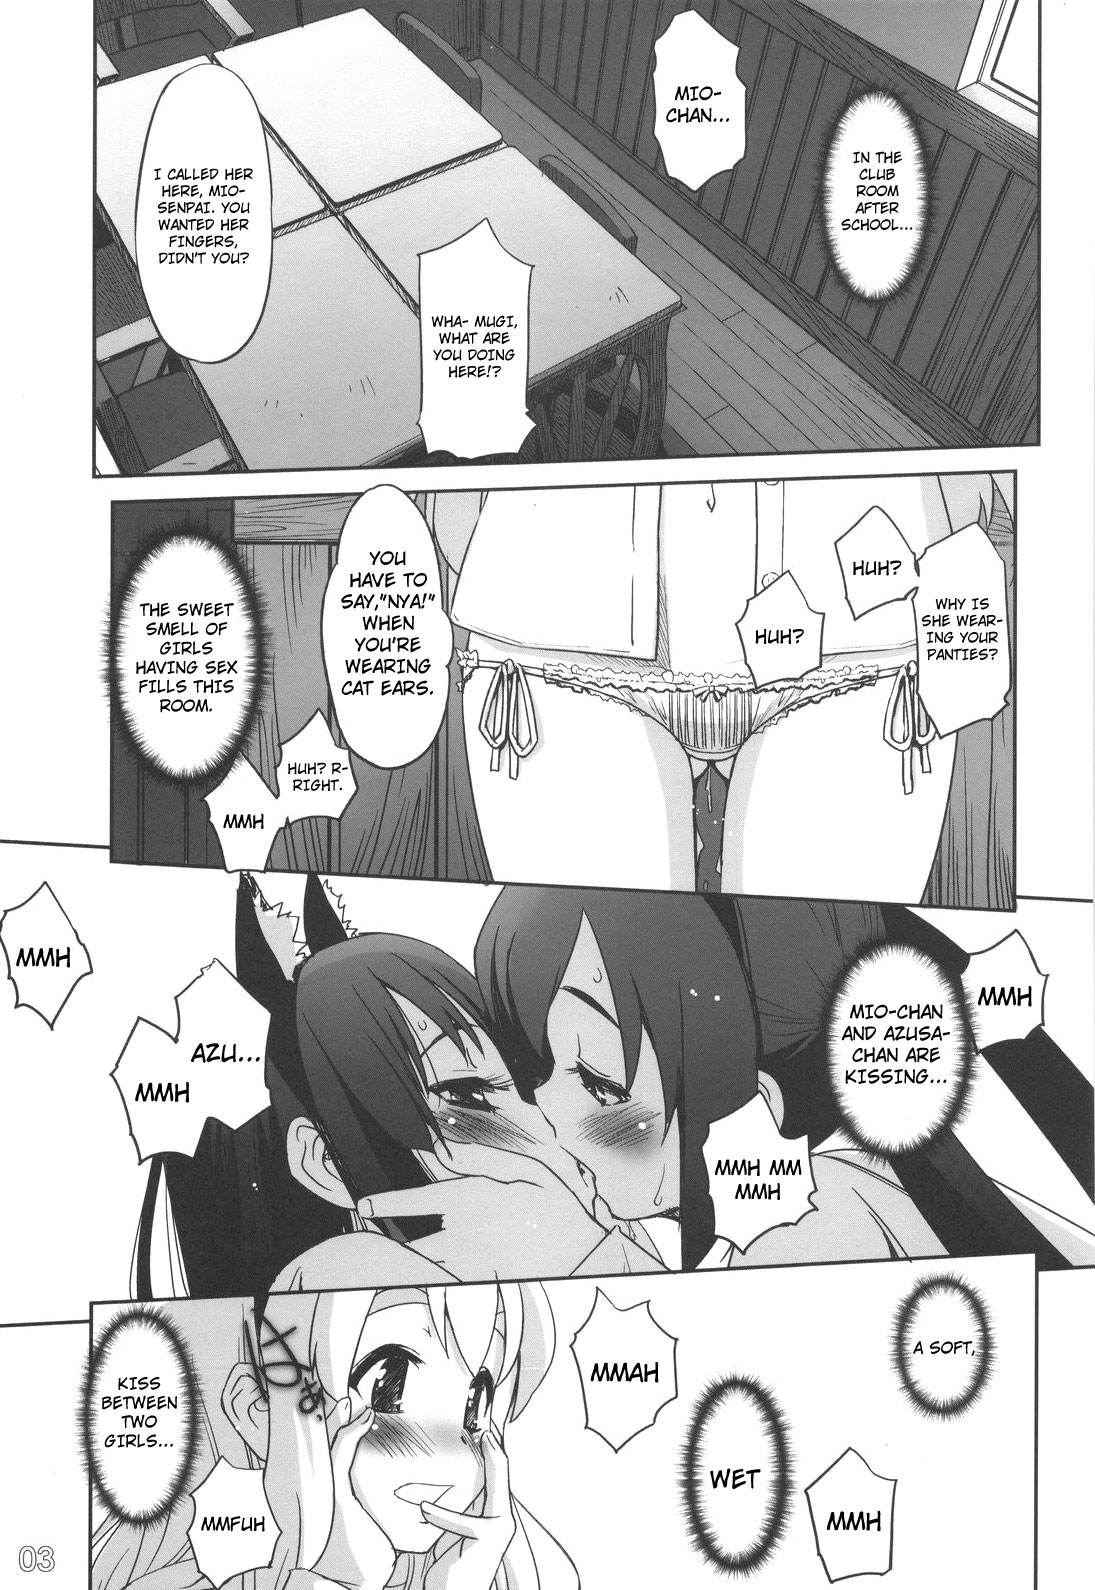 (C76) [G-Power! (Sasayuki)] Nekomimi to Toilet to Houkago no Bushitsu | Cat Ears And A Restroom And The Club Room After School (K-ON) [English] [Nicchiscans-4Dawgz] page 2 full